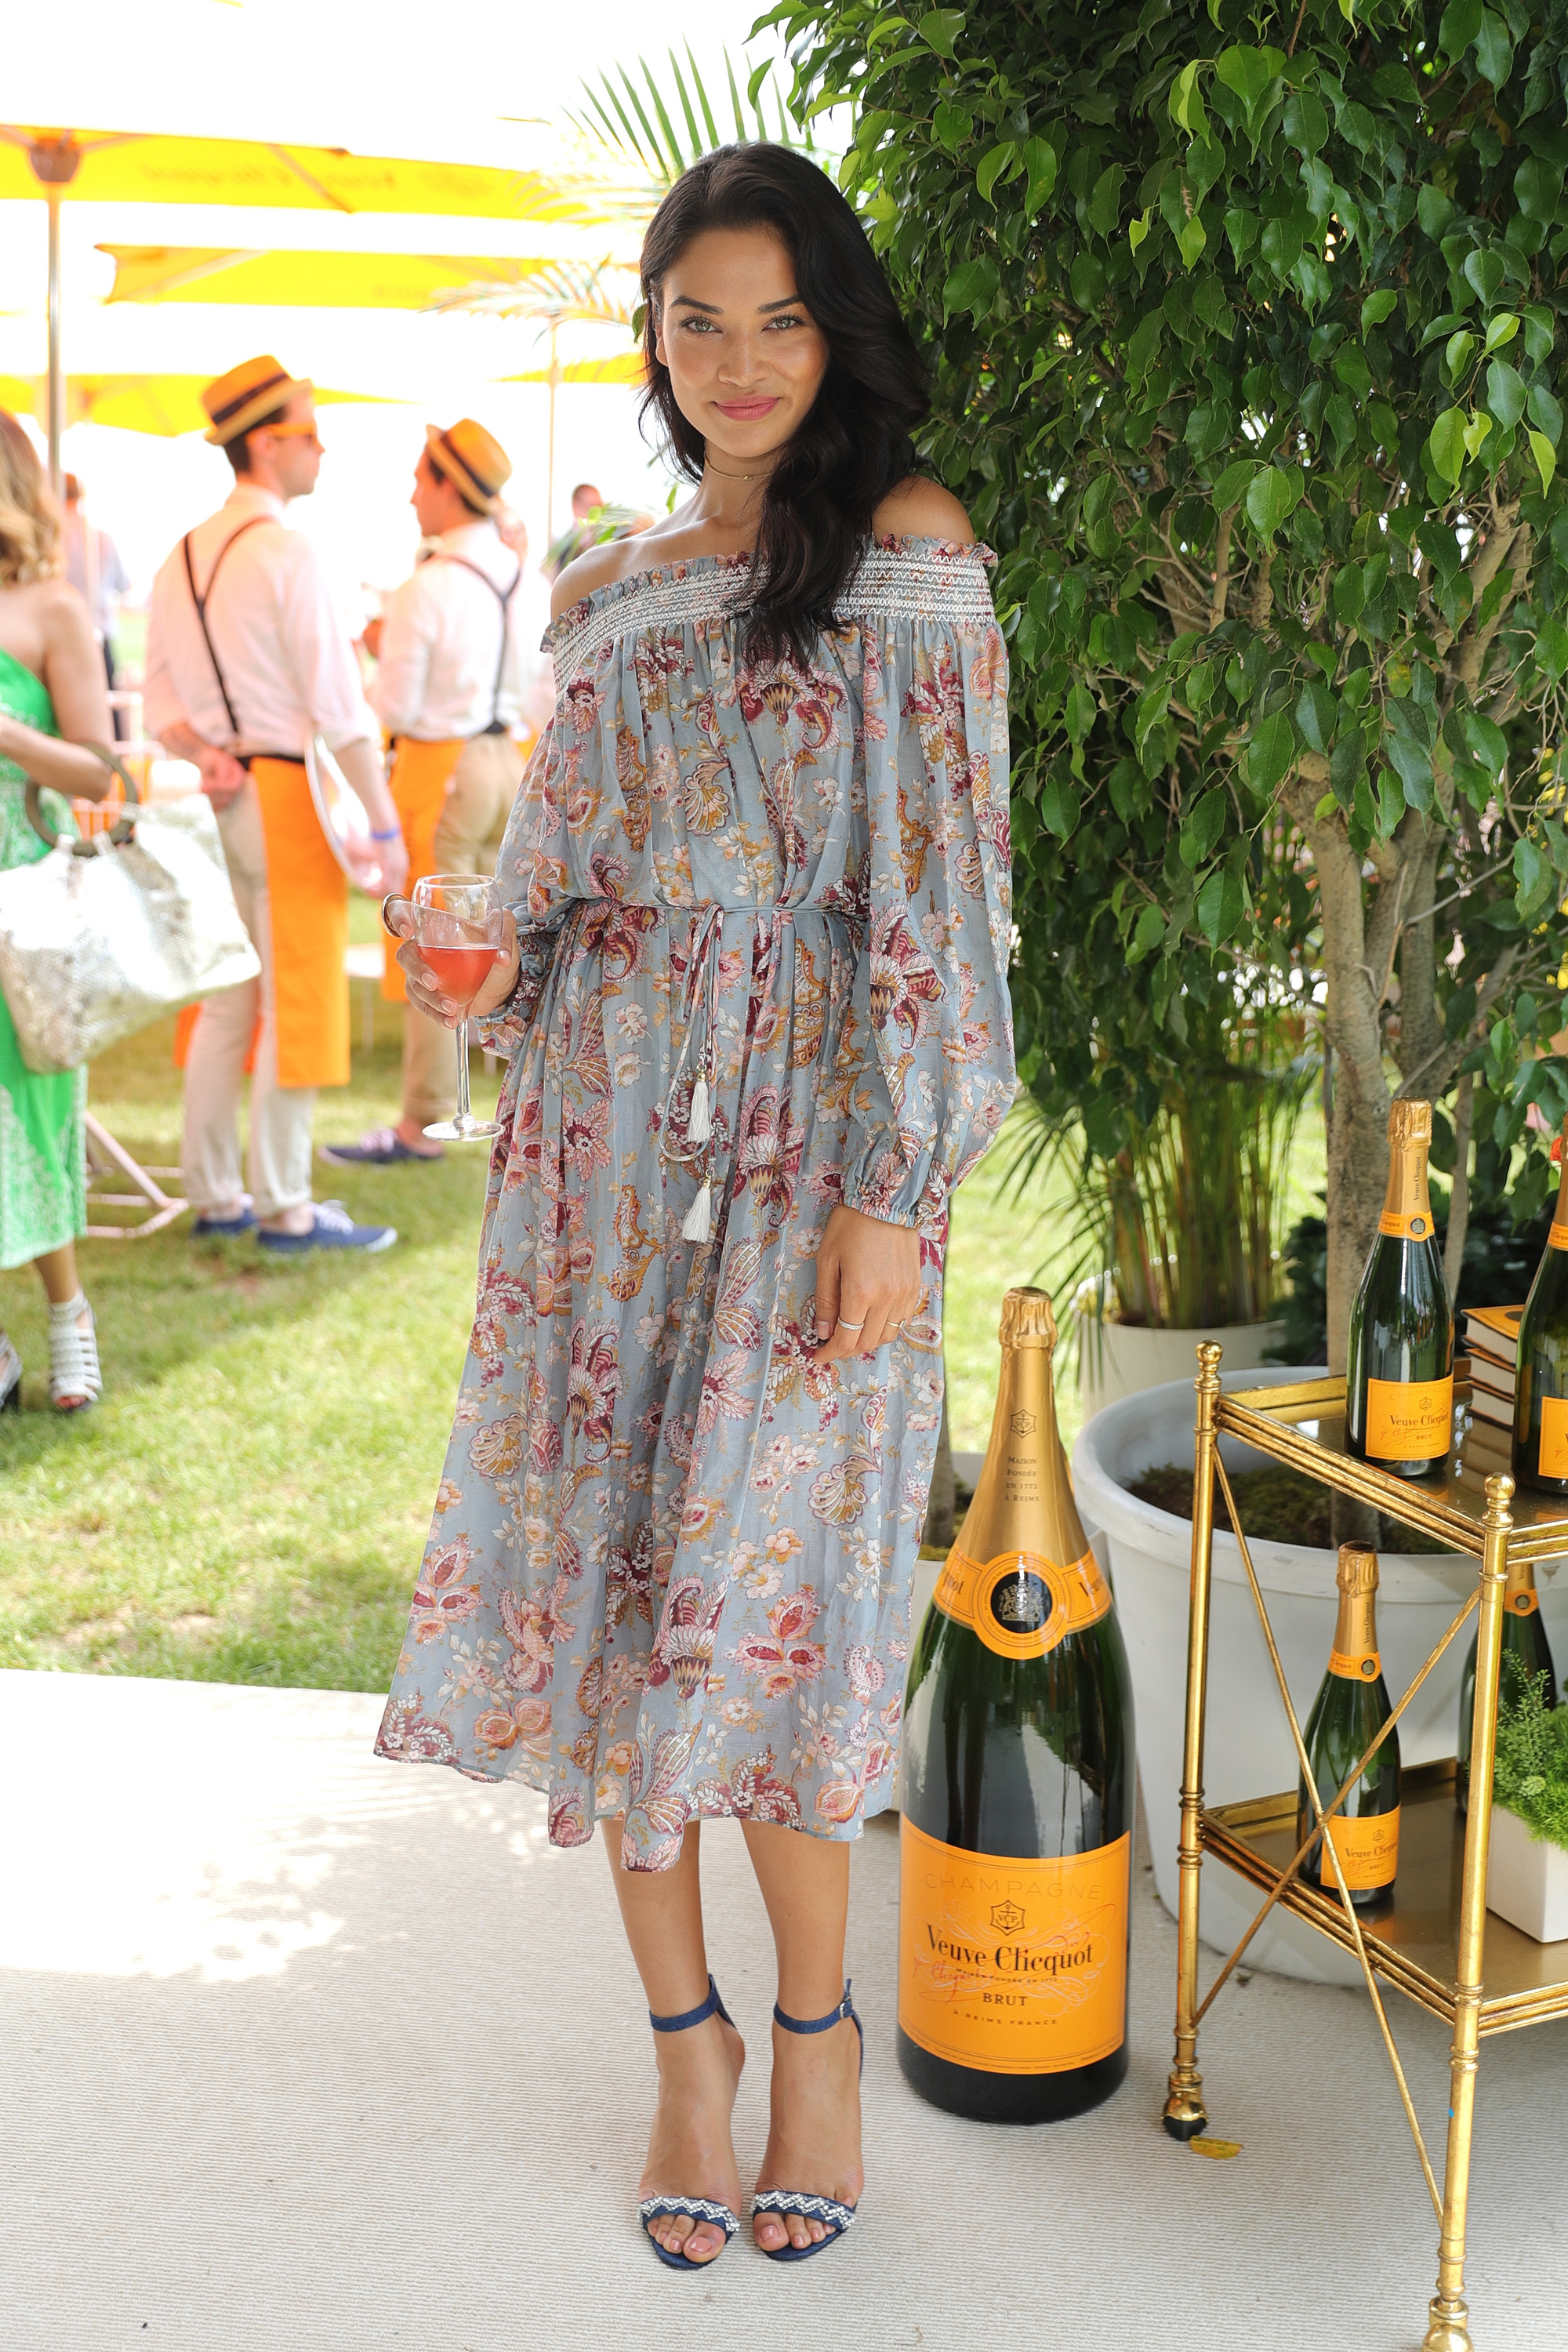 JERSEY CITY, NJ - JUNE 04:  Model Shanina Shaik attends the Ninth Annual Veuve Clicquot Polo Classic at Liberty State Park on June 4, 2016 in Jersey City, New Jersey.  (Photo by Neilson Barnard/Getty Images for Veuve Clicquot)